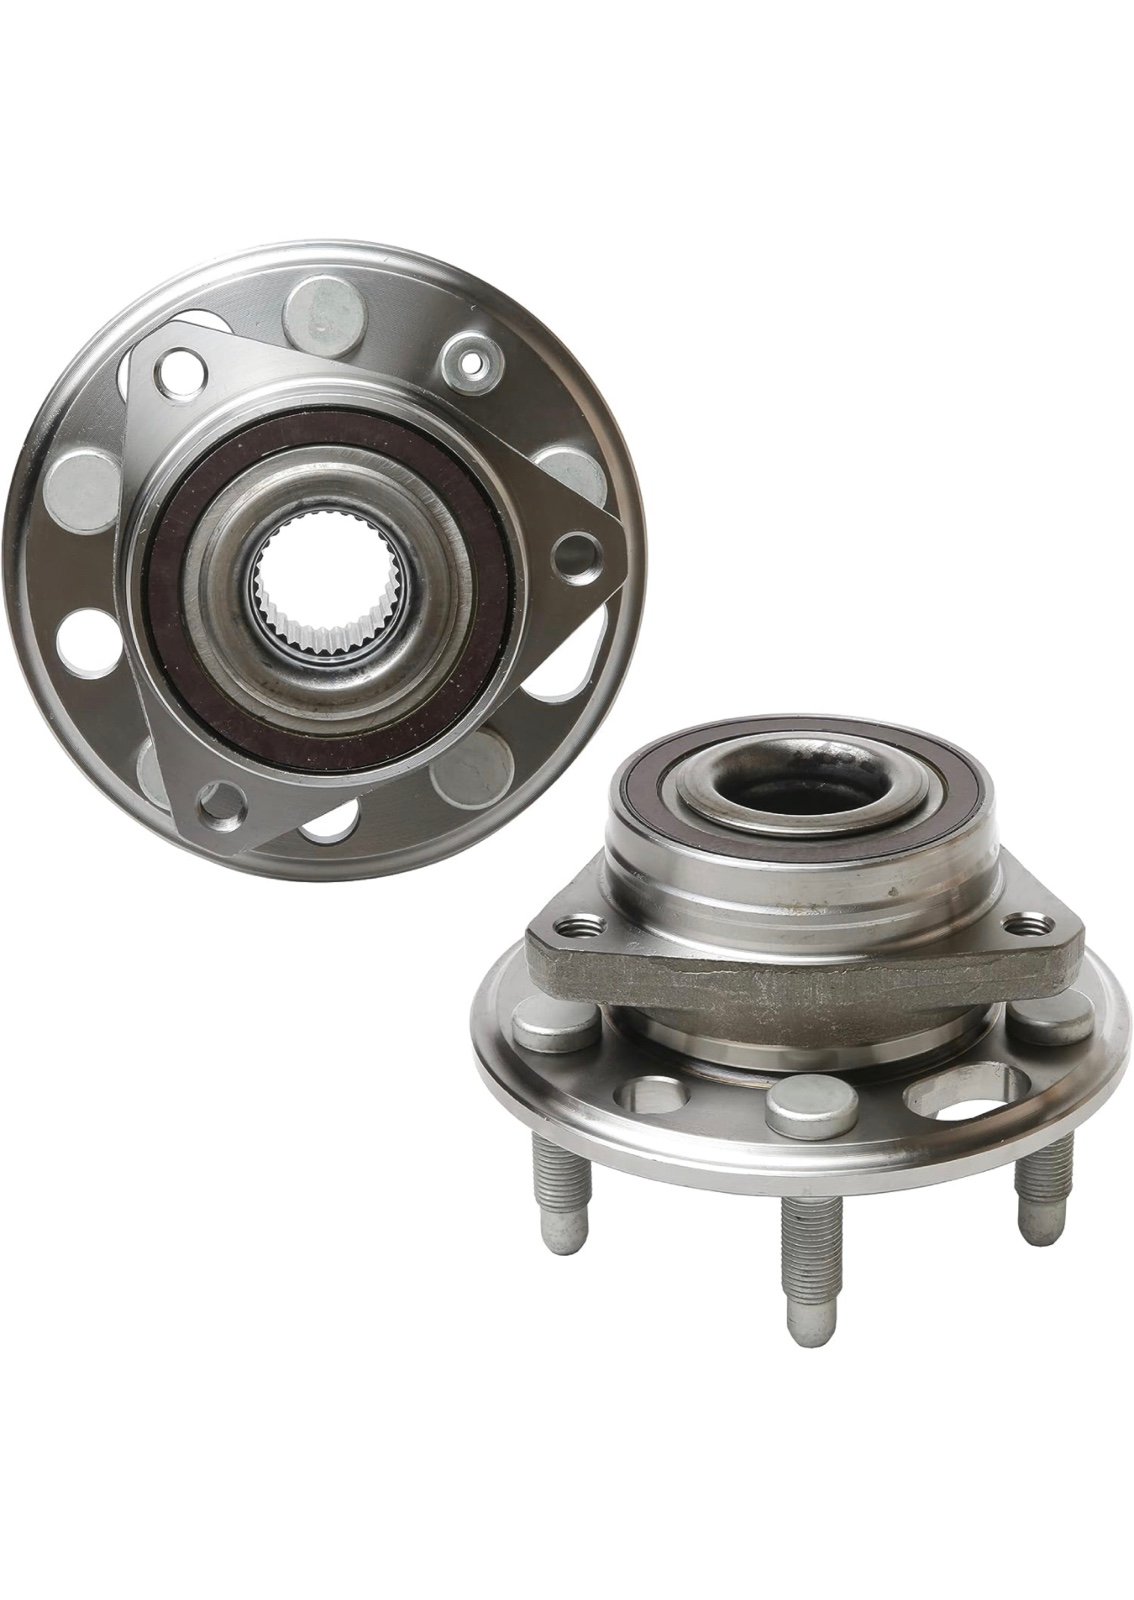 Replacement Front or Rear Wheel Hub Bearing Assembly Set of 2 - Compatible with HhPfucefd